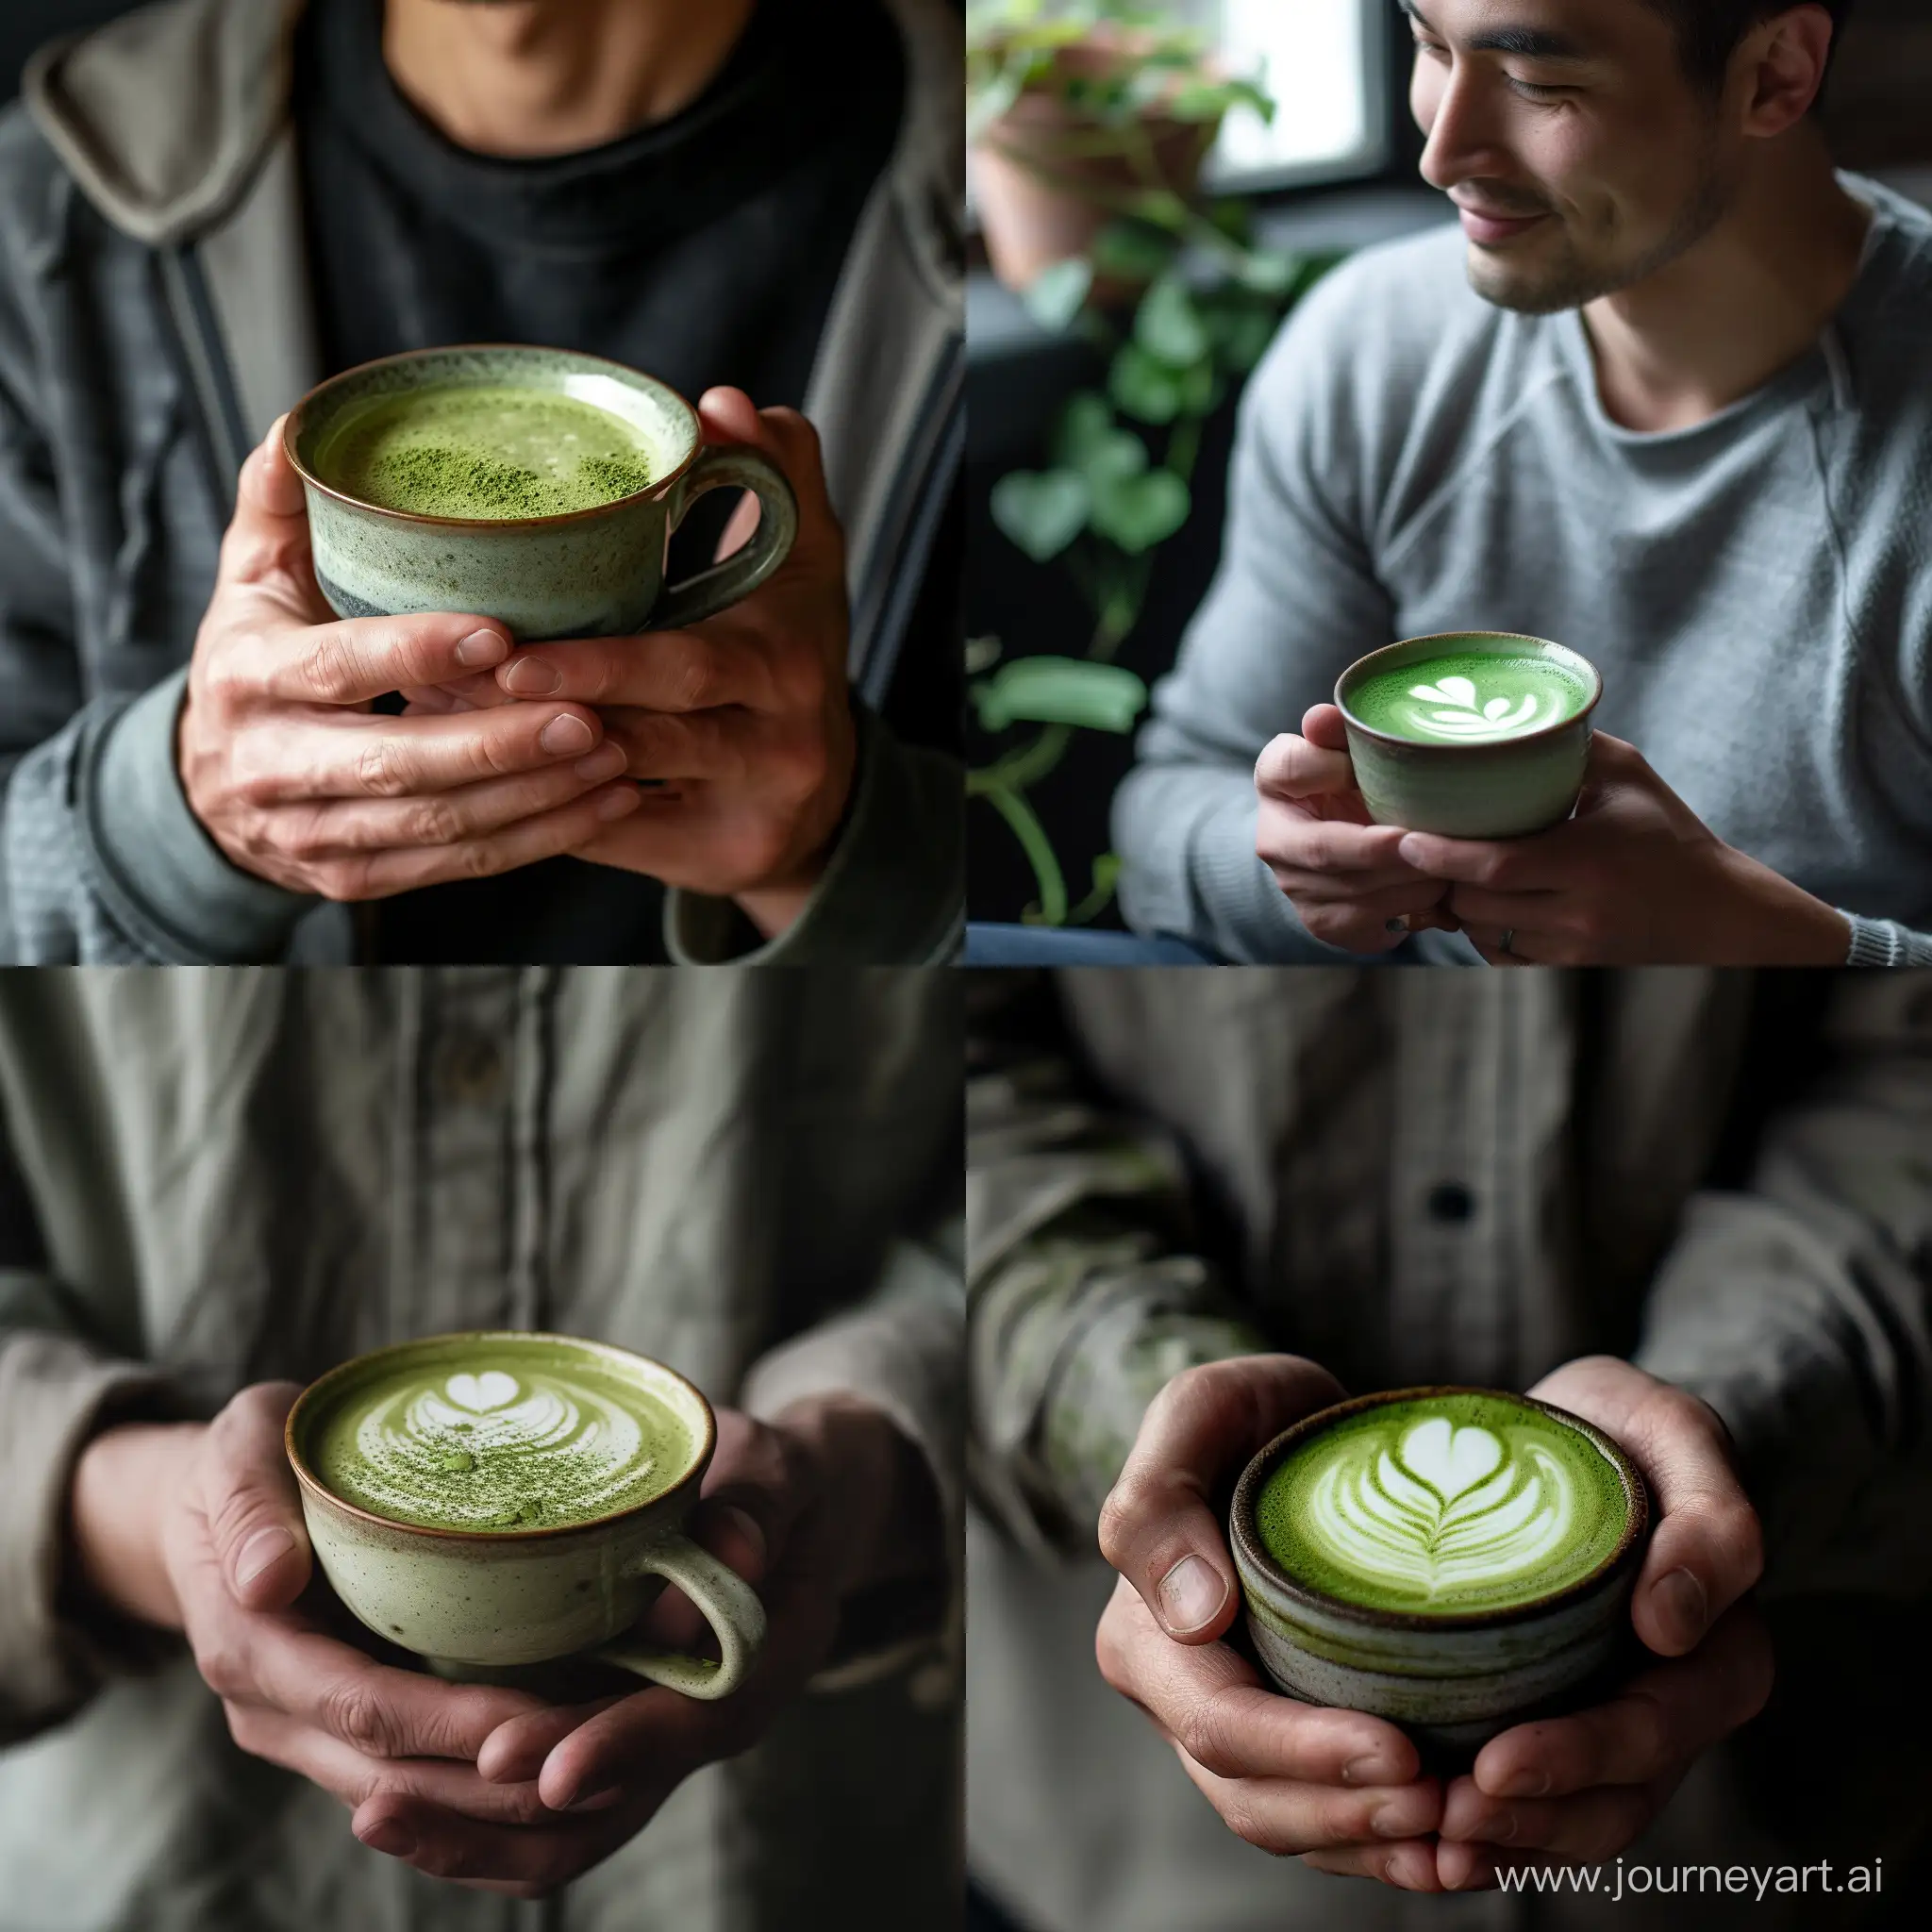 Real picture of a man holding a cup of matcha tea. All details are natural, real and accurate.